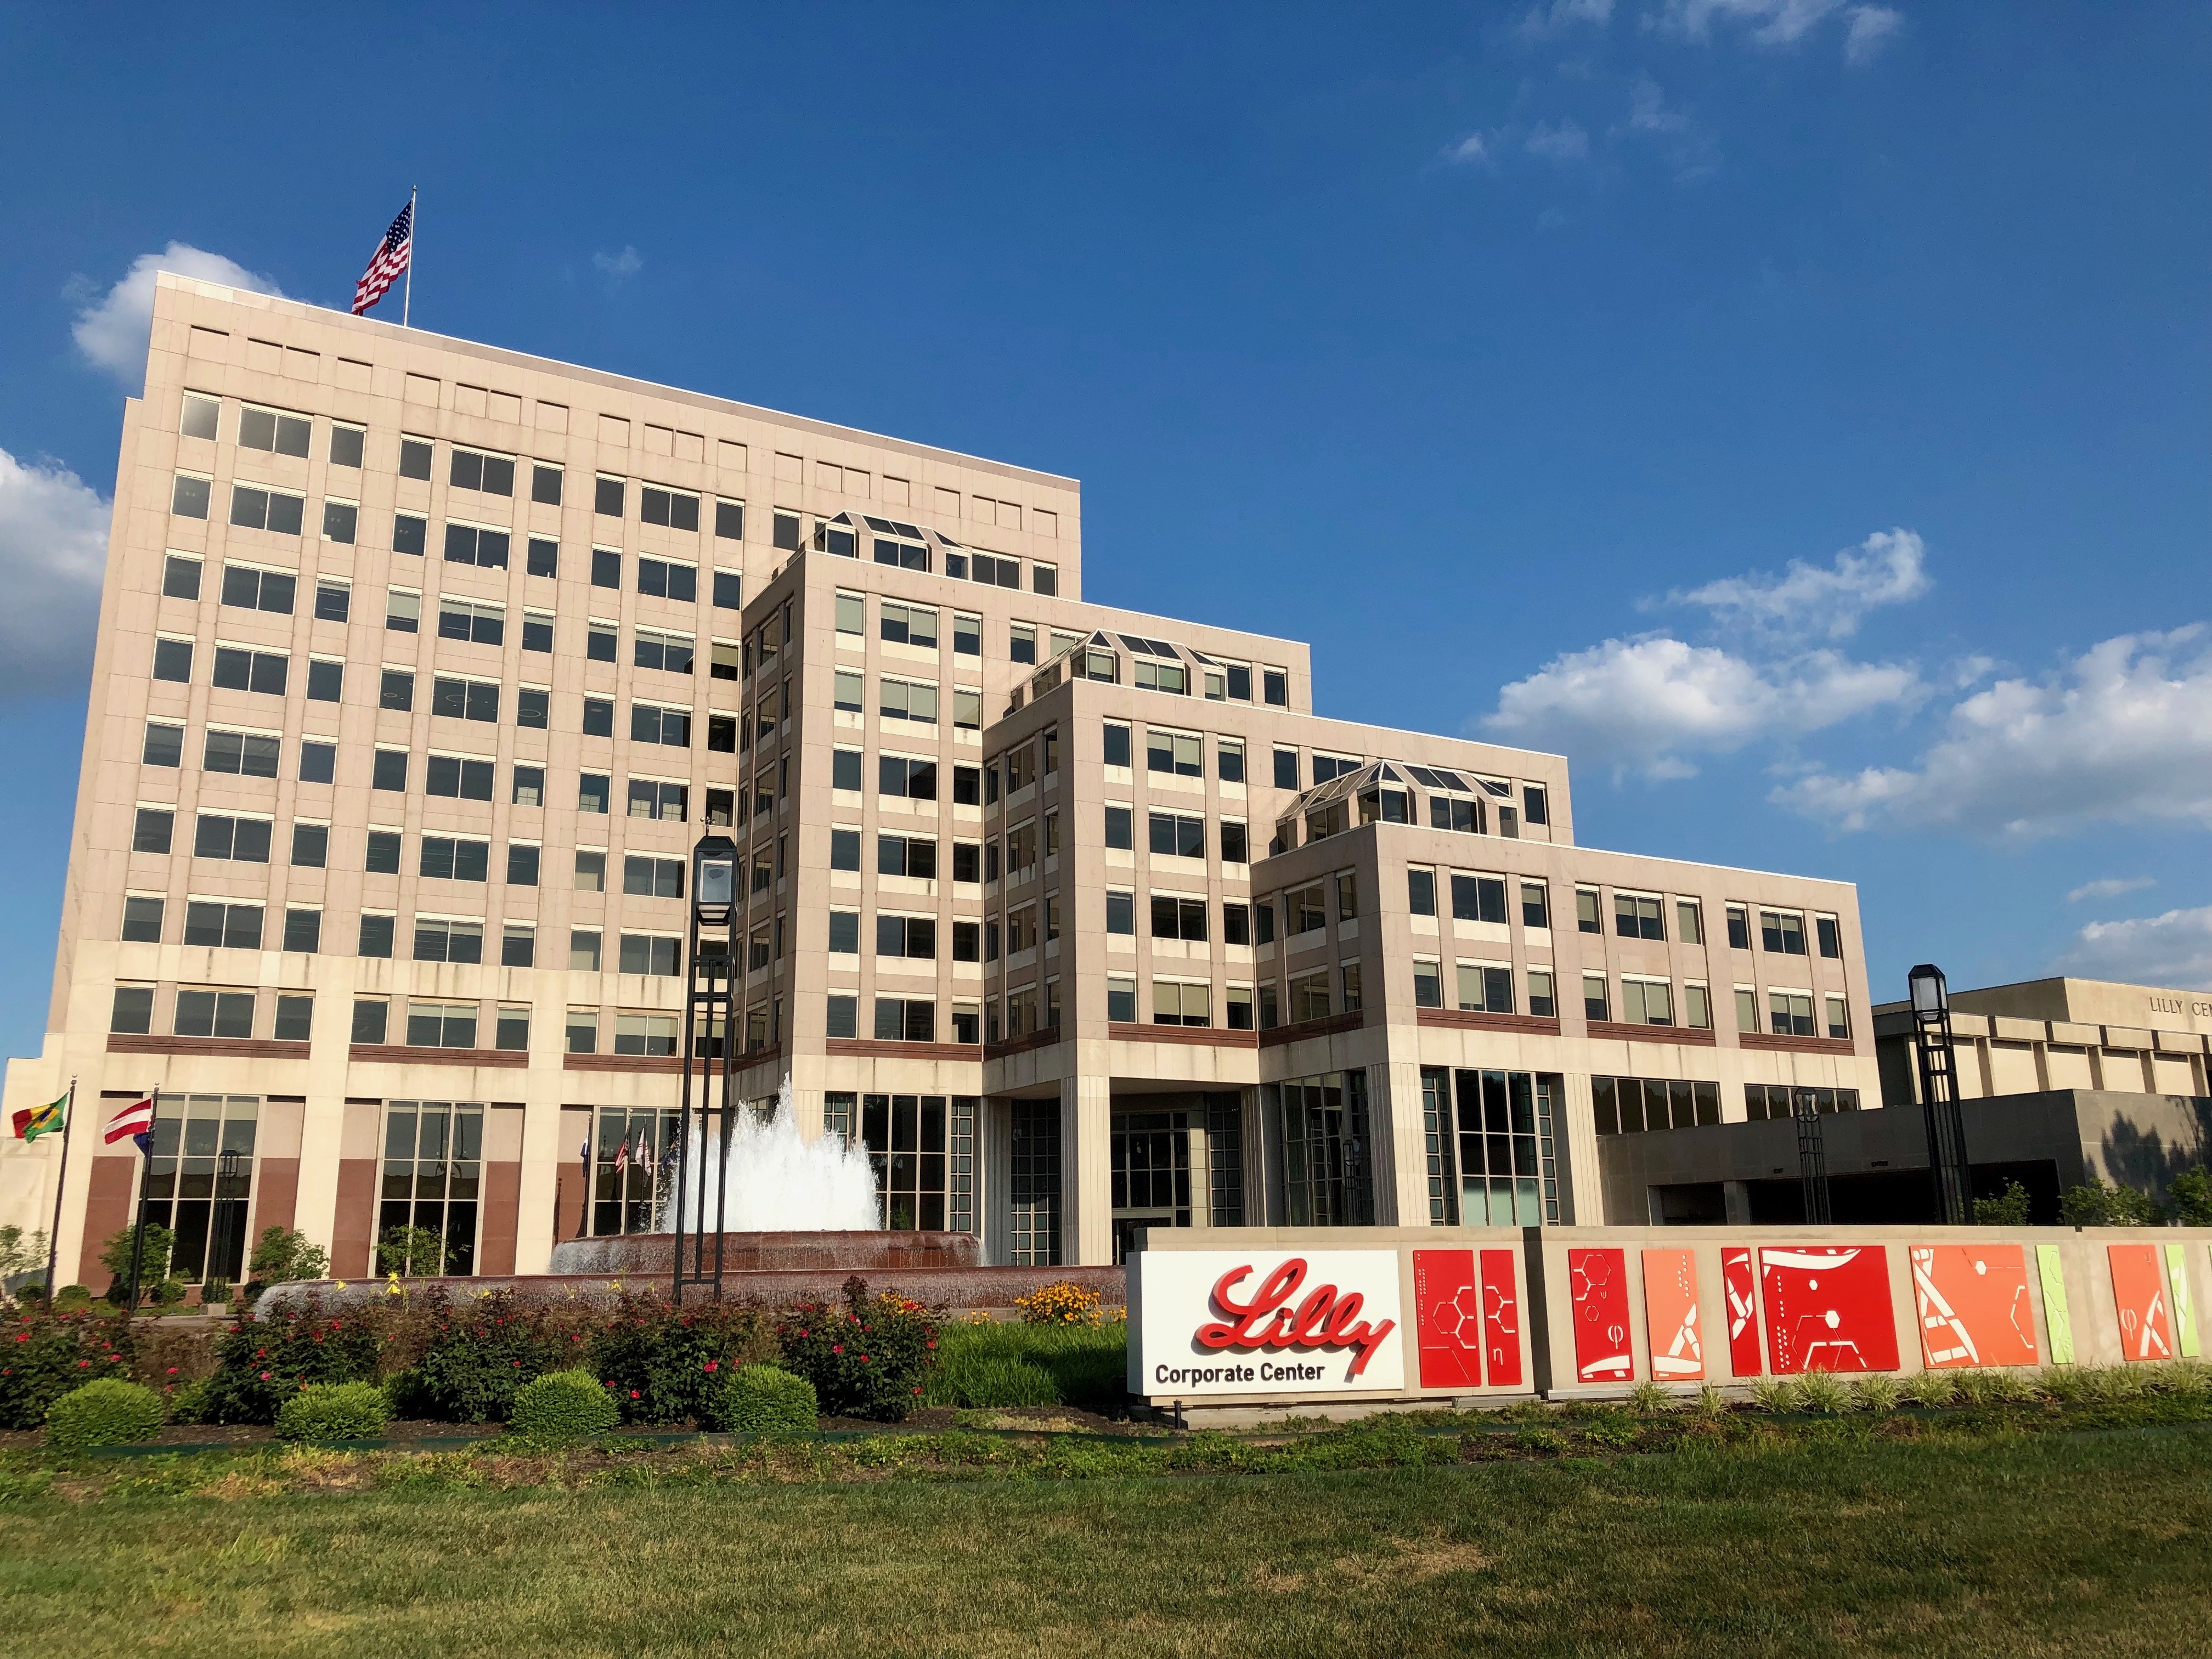 Health News Roundup: Eli Lilly to acquire manufacturing facility from Nexus Pharma; Drug distributor Cardinal Health to lose OptumRx contracts and more